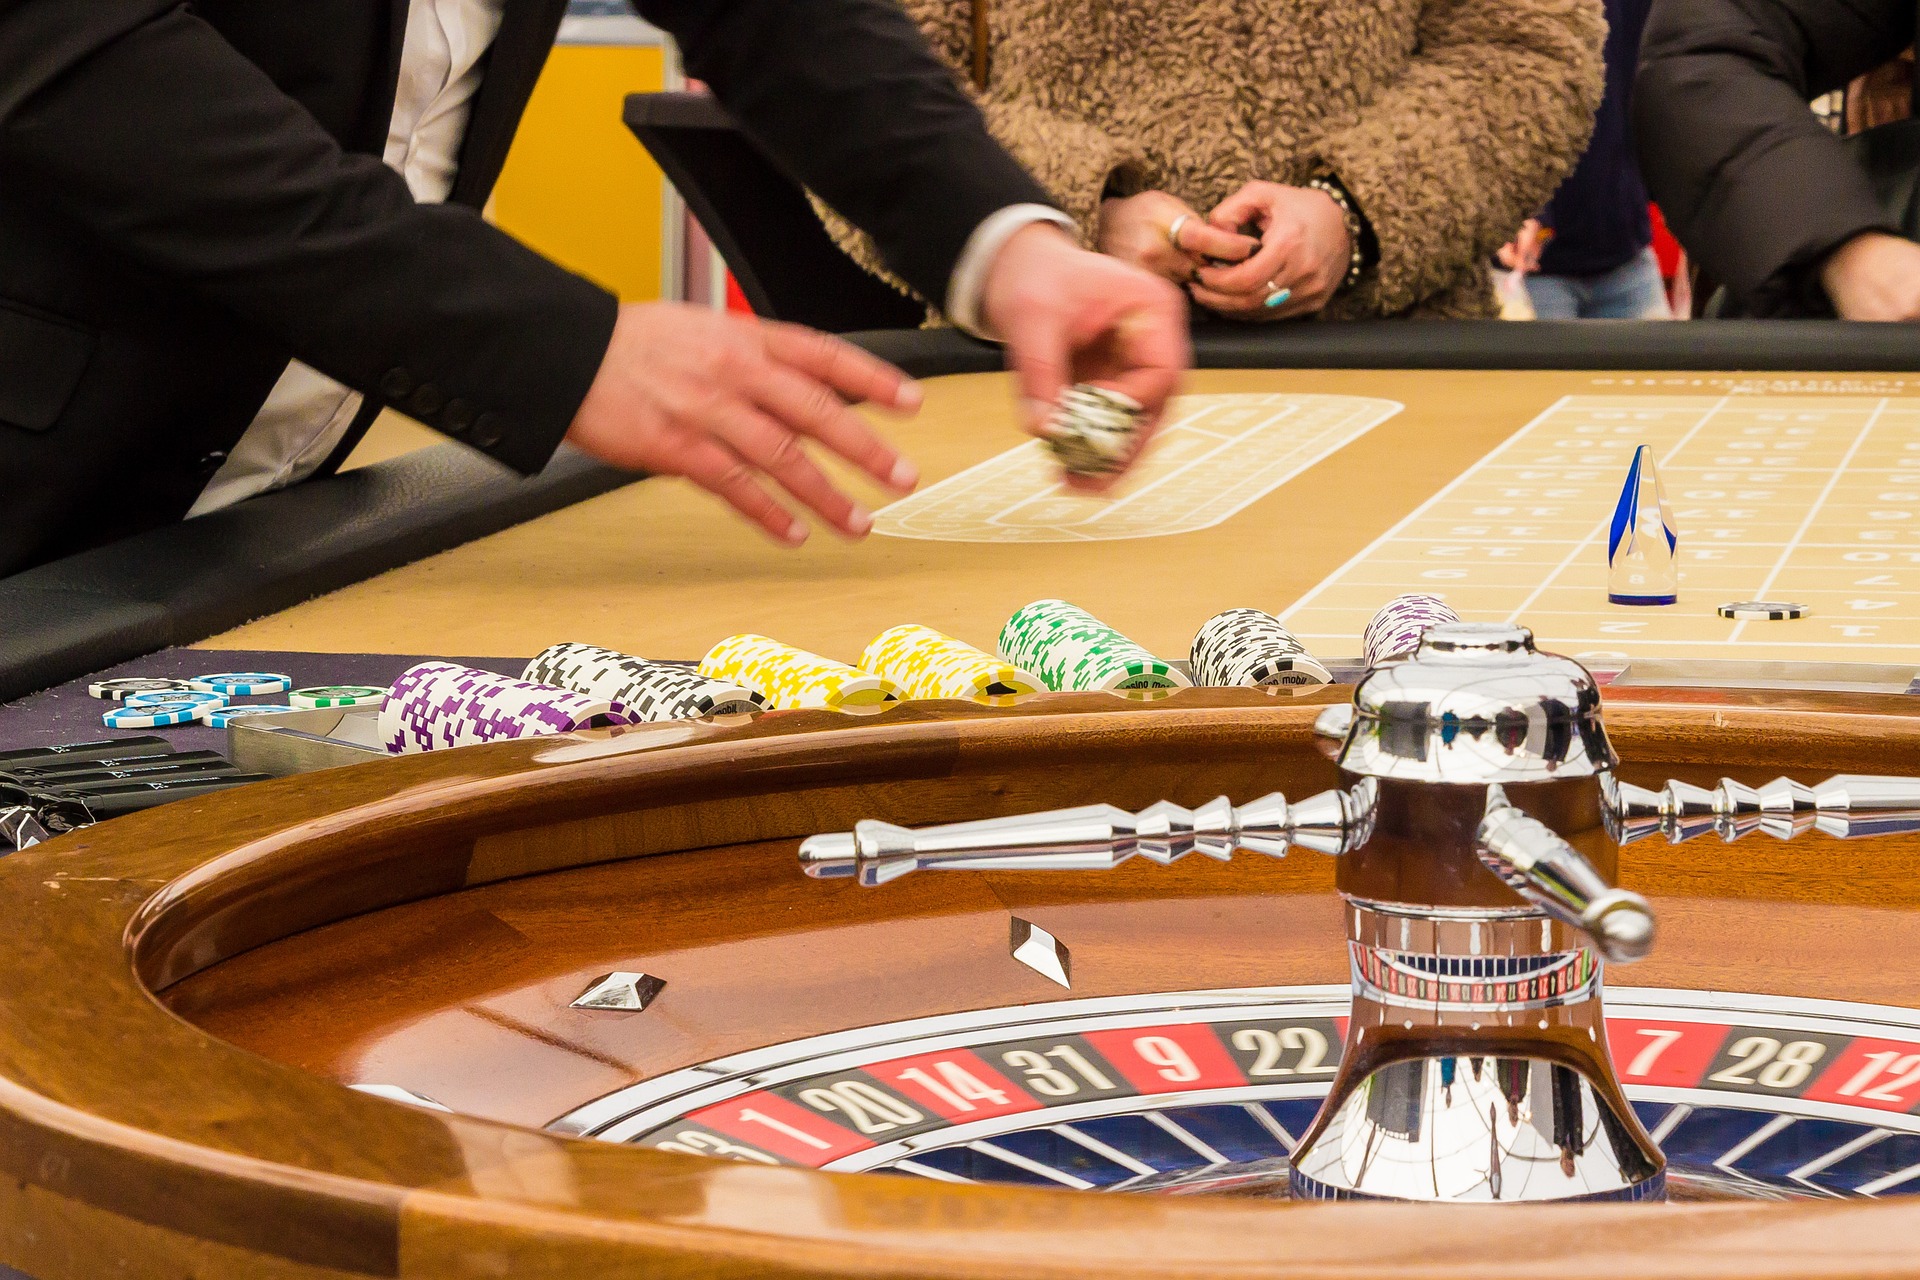 What Are The Psychological Effects Of Gambling On Your Brain? The Dark Side Of Gambling